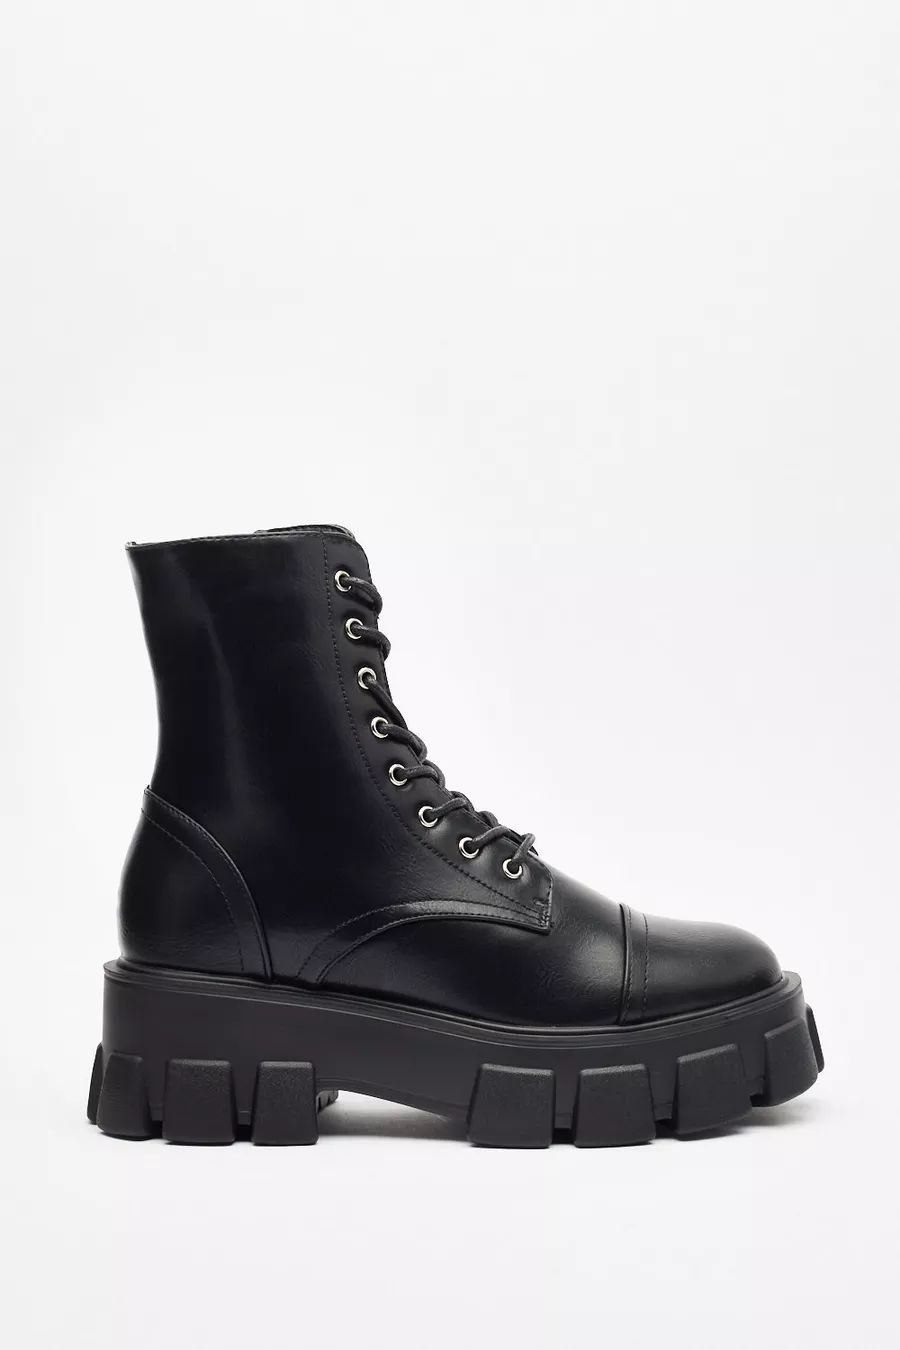 Cleated Chunky Biker Boots | Nasty Gal (US)